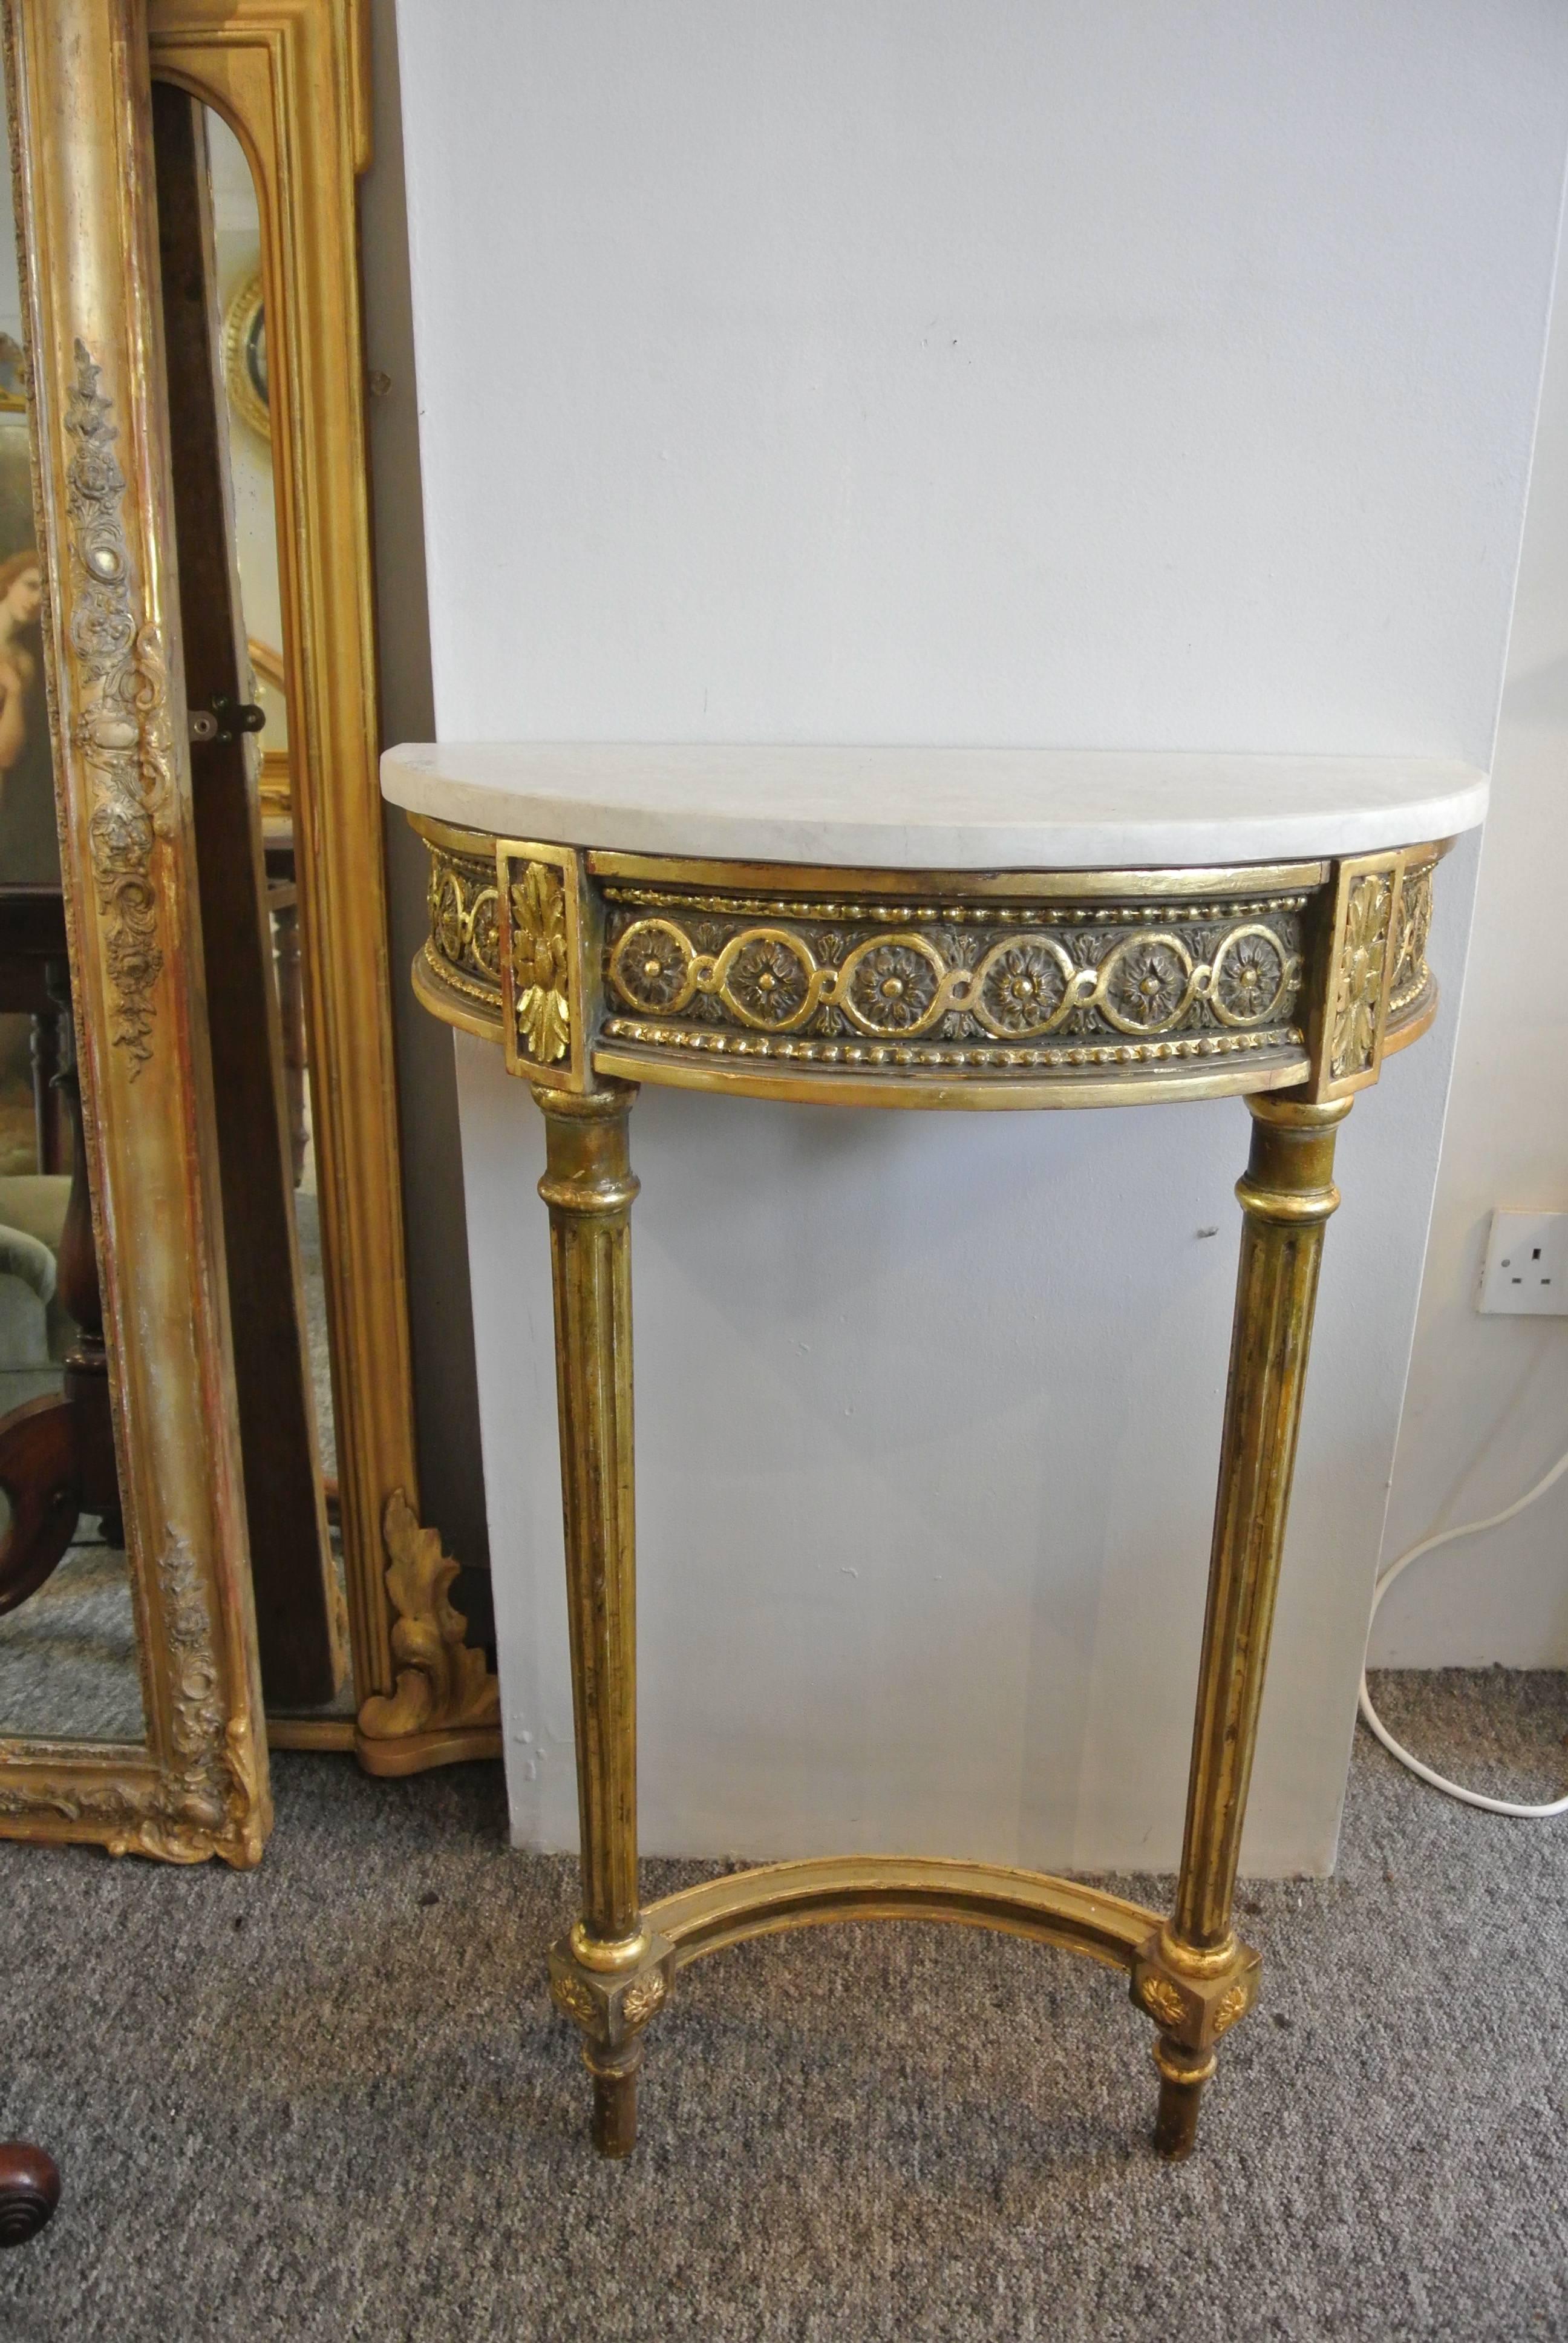 A beautiful Regency giltwood console table of small proportions in excellent condition. Later white marble top.